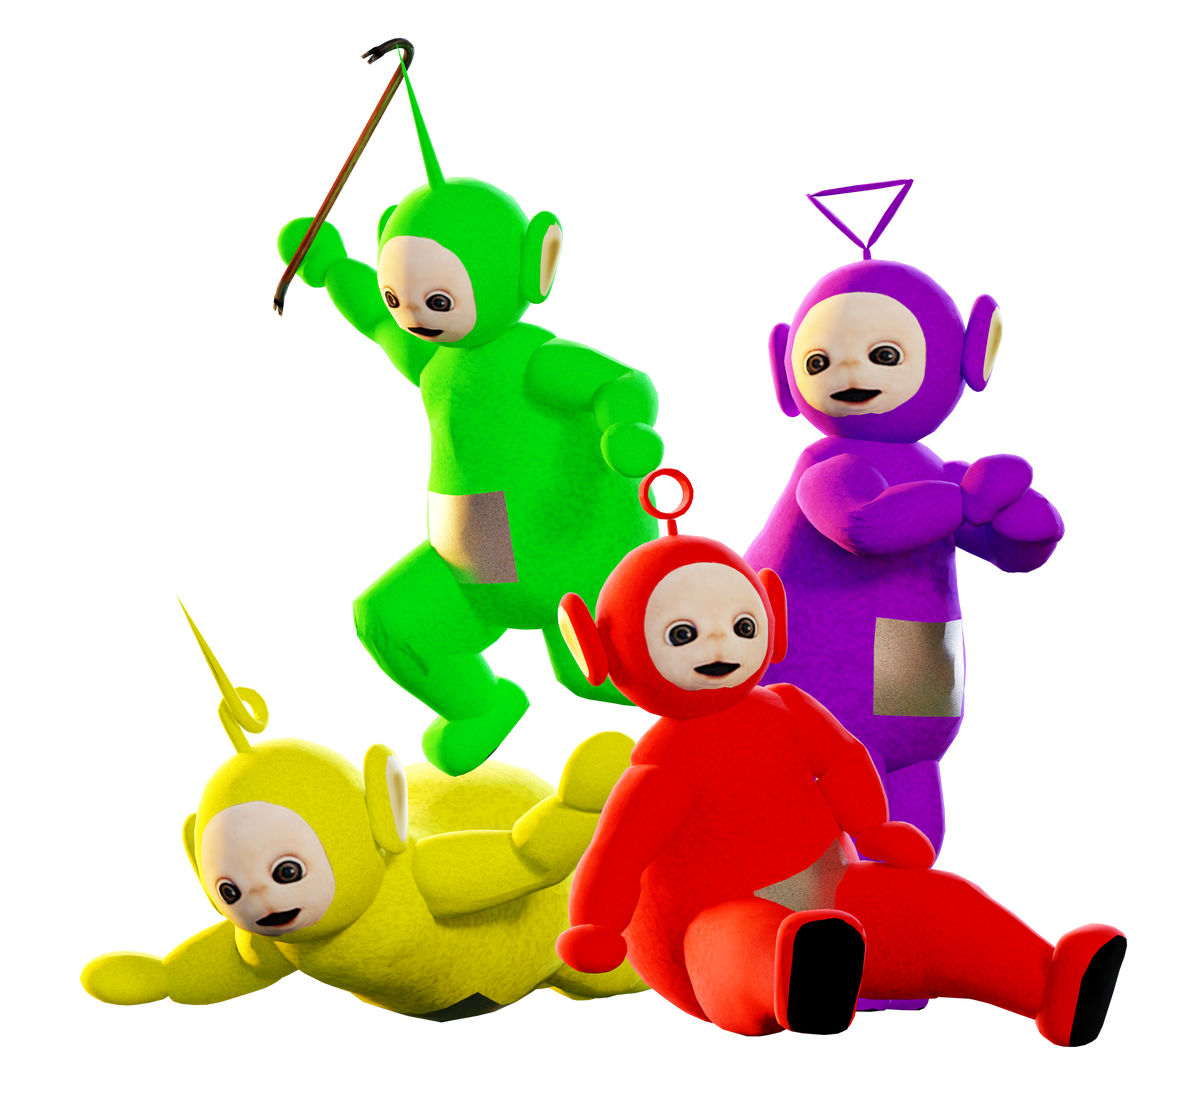 Teletubbies Let's Go | Winter Holiday Fun with the Teletubbies | 35 Min  Compilation - YouTube